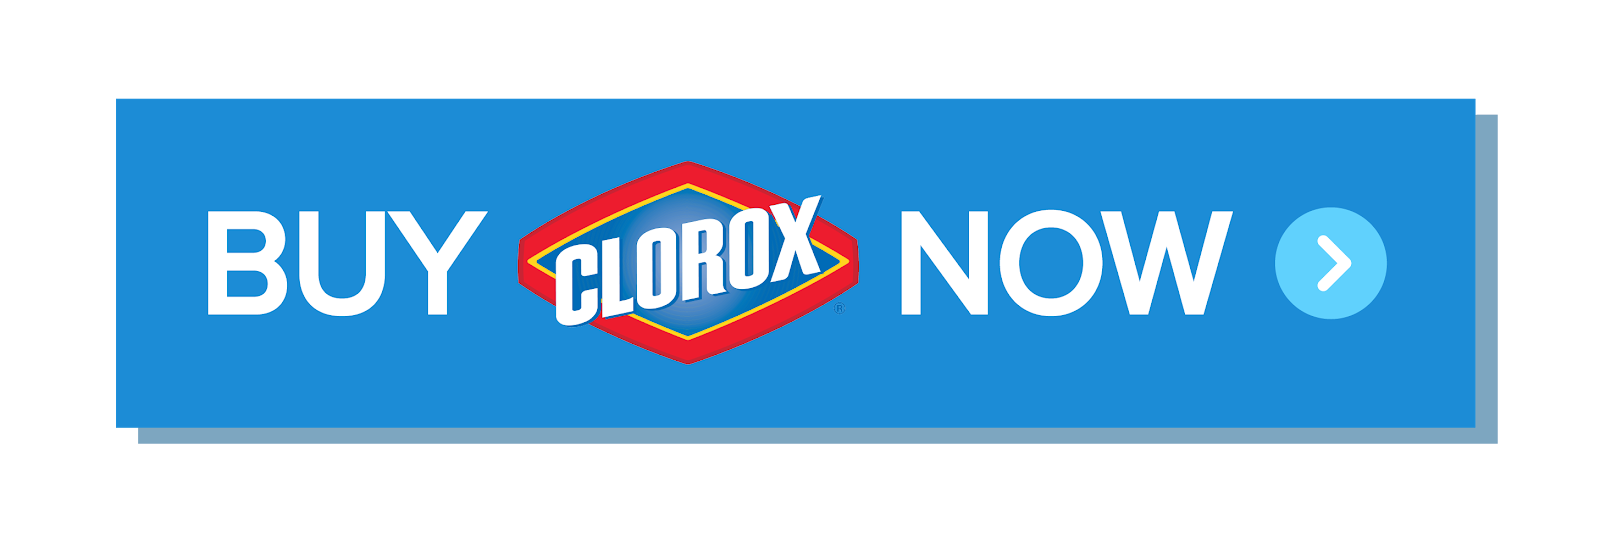 buy clorox now | Tips for Plane Travel with a Baby | Clorox To Go Wipes | @maeamor